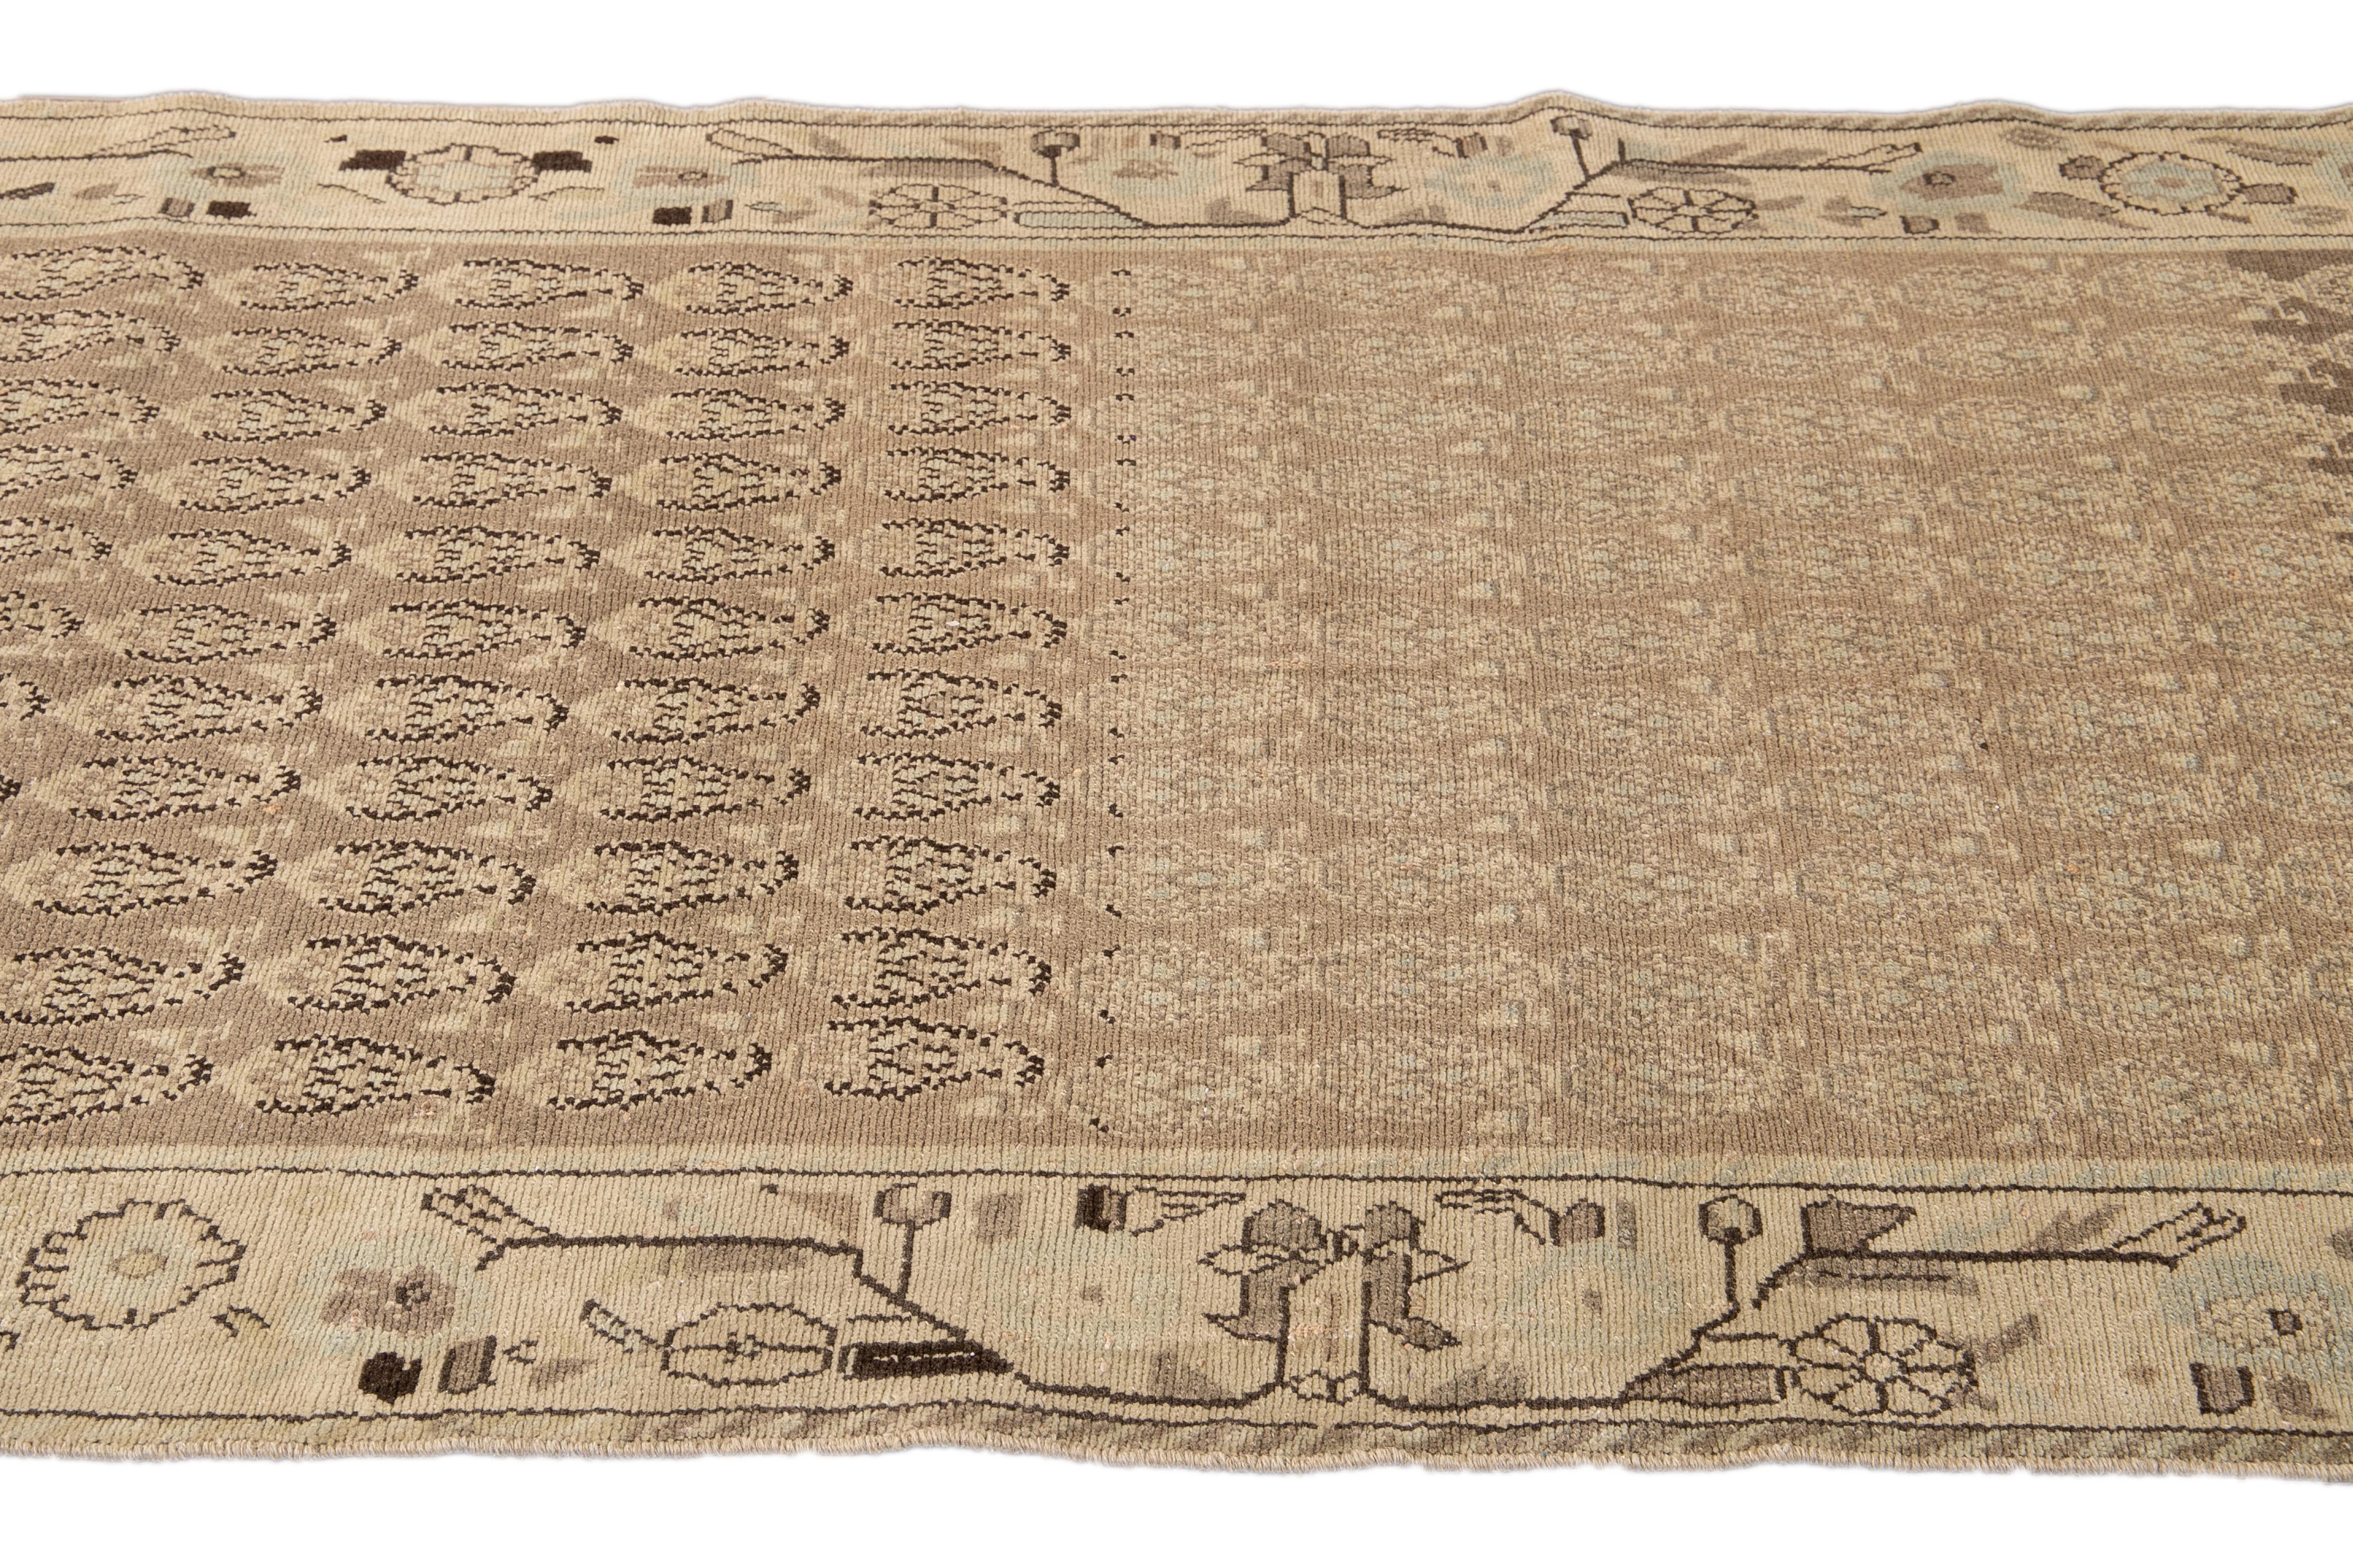 Beautiful antique Malayer hand-knotted wool runner with a Tan field. This Malayer rug has a beige frame and accents of blue and brown in an all-over gorgeous geometric medallion floral pattern design.

This rug measures: 3'7